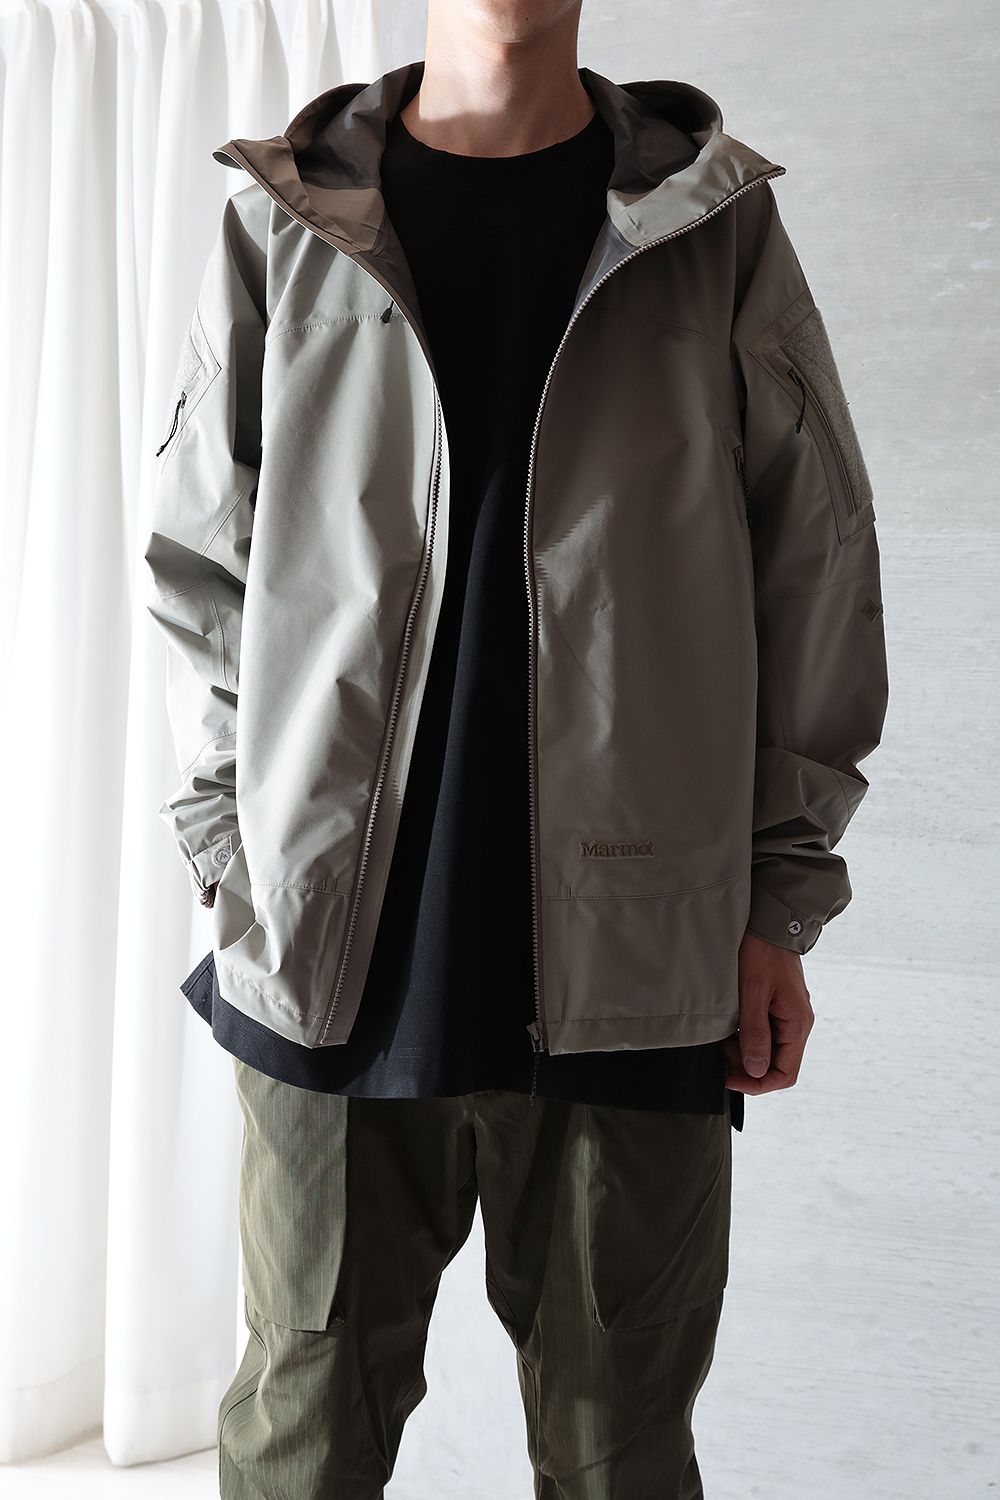 【VAINL ARCHIVE Connected MARMOT】LF FOODY(GRAY) - L